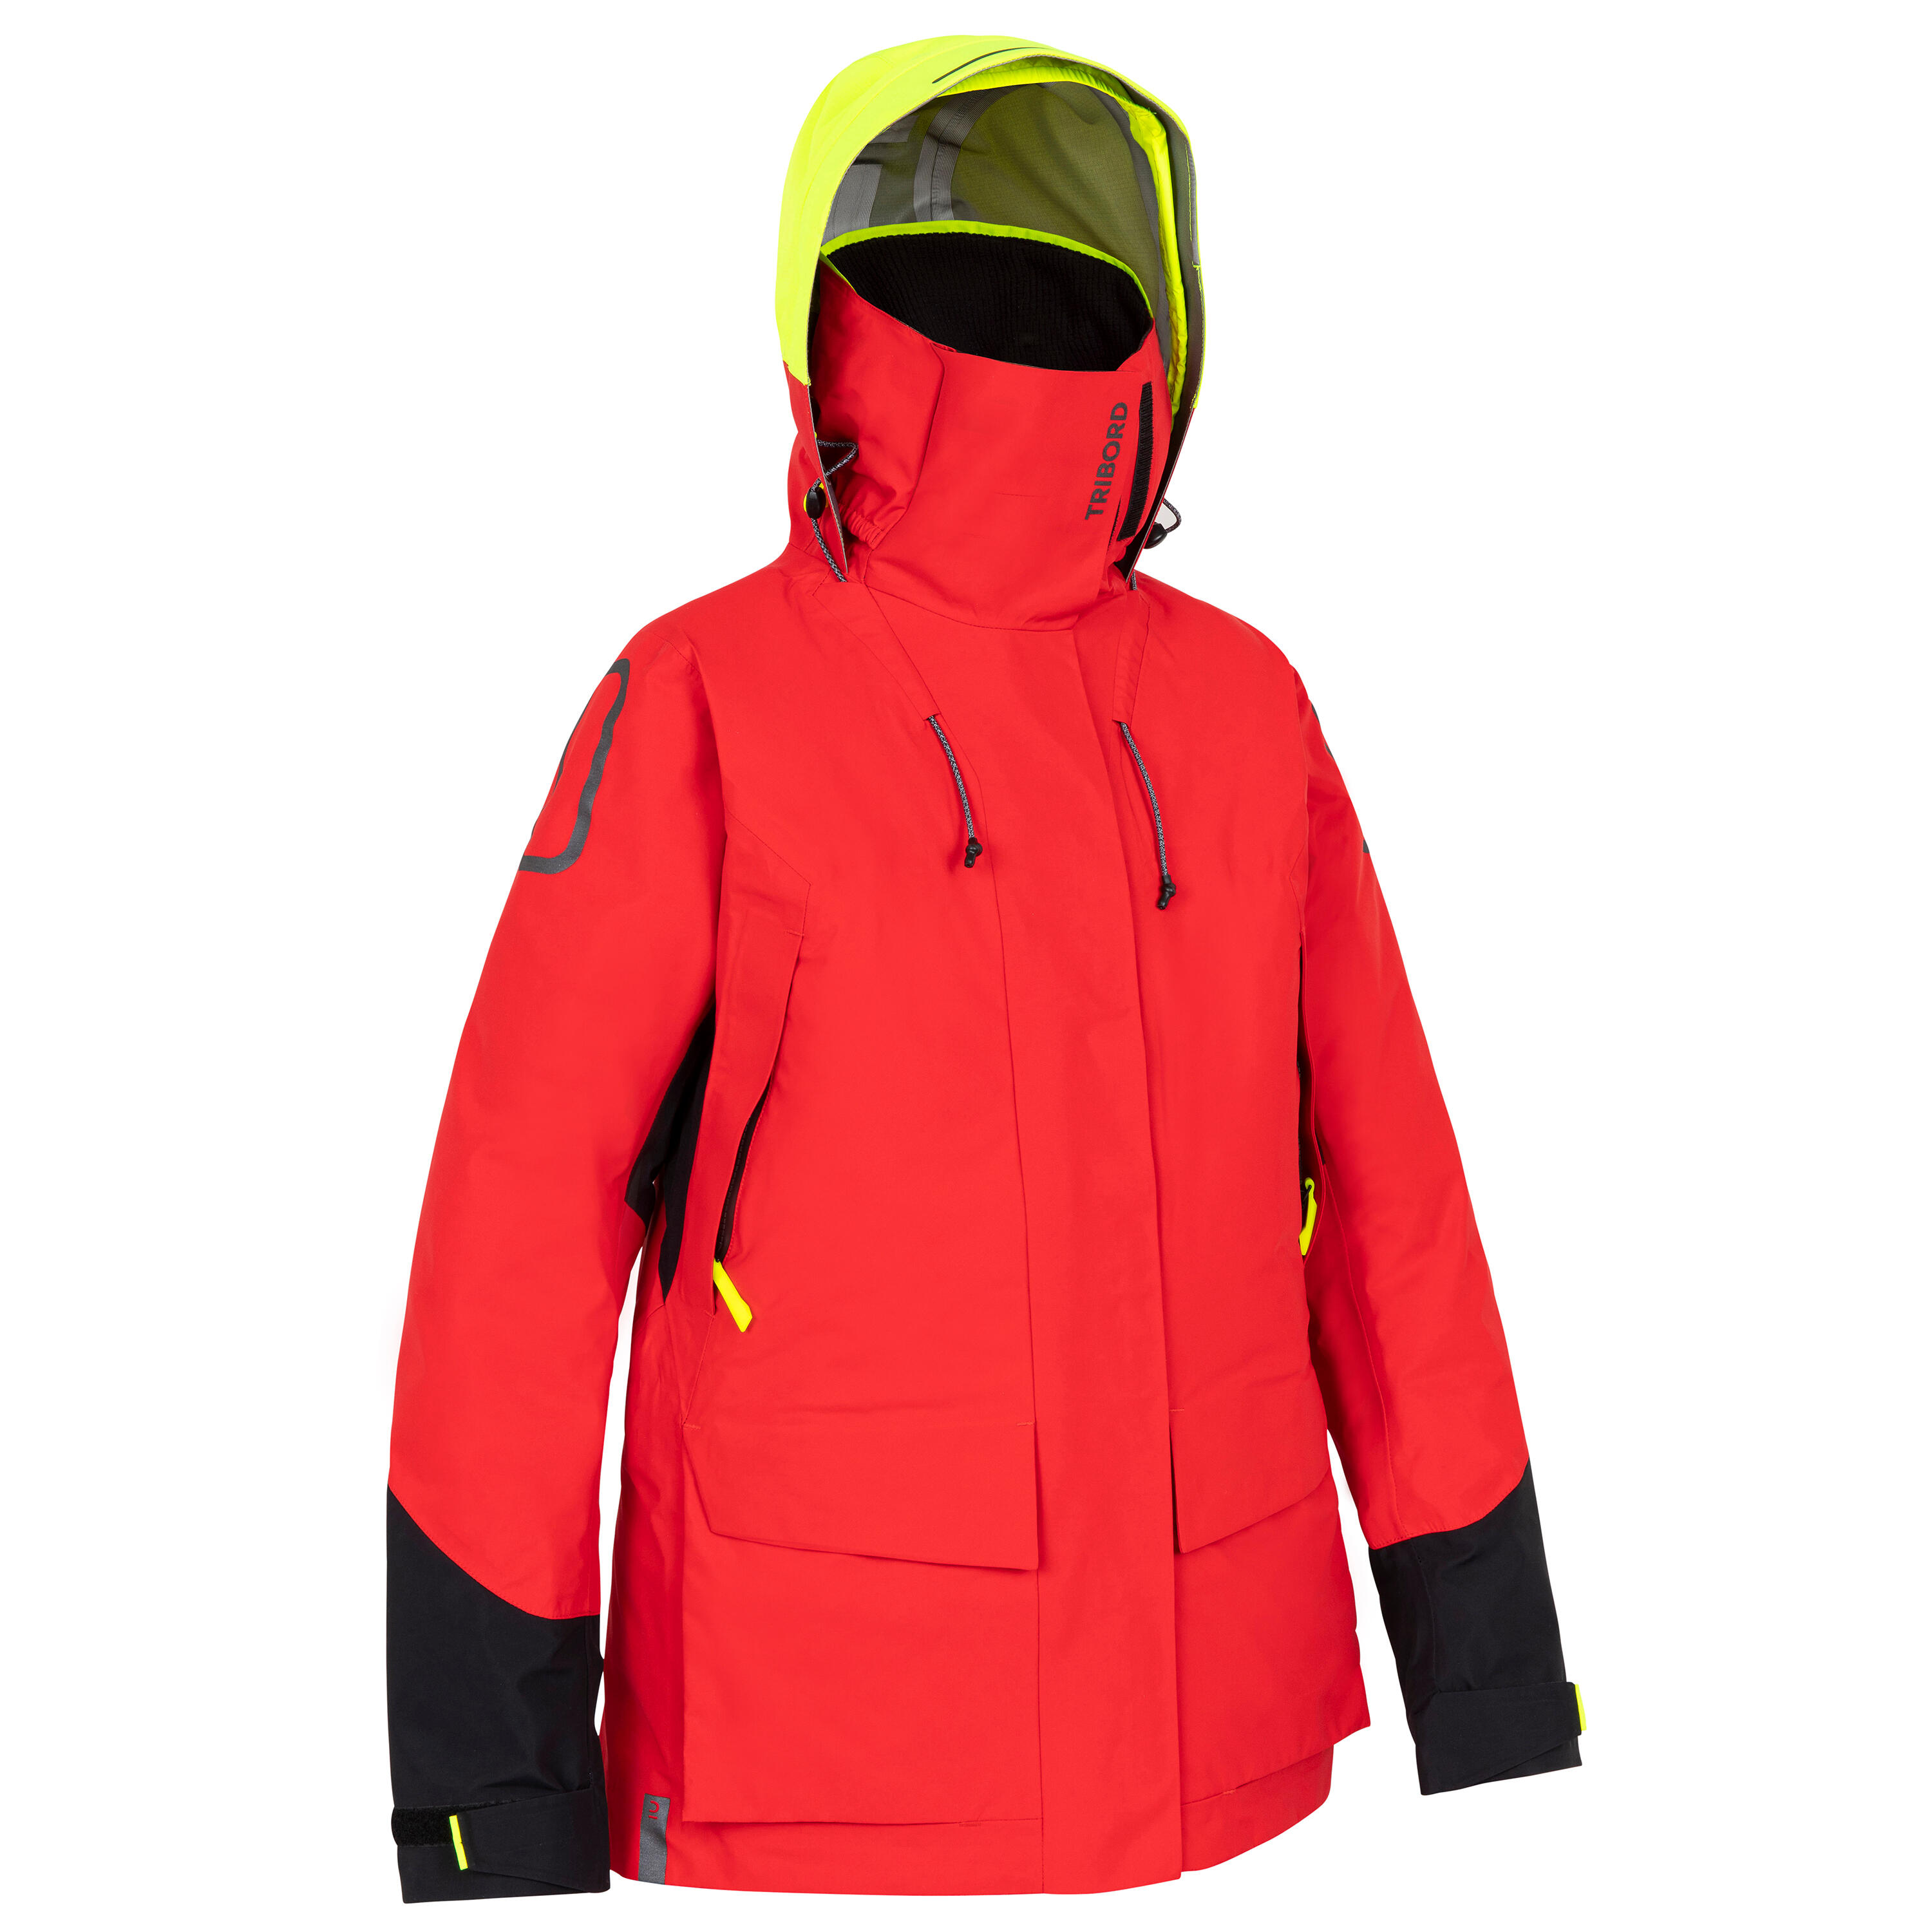 Women’s Sailing Jacket Offshore 900 - Red 5/12